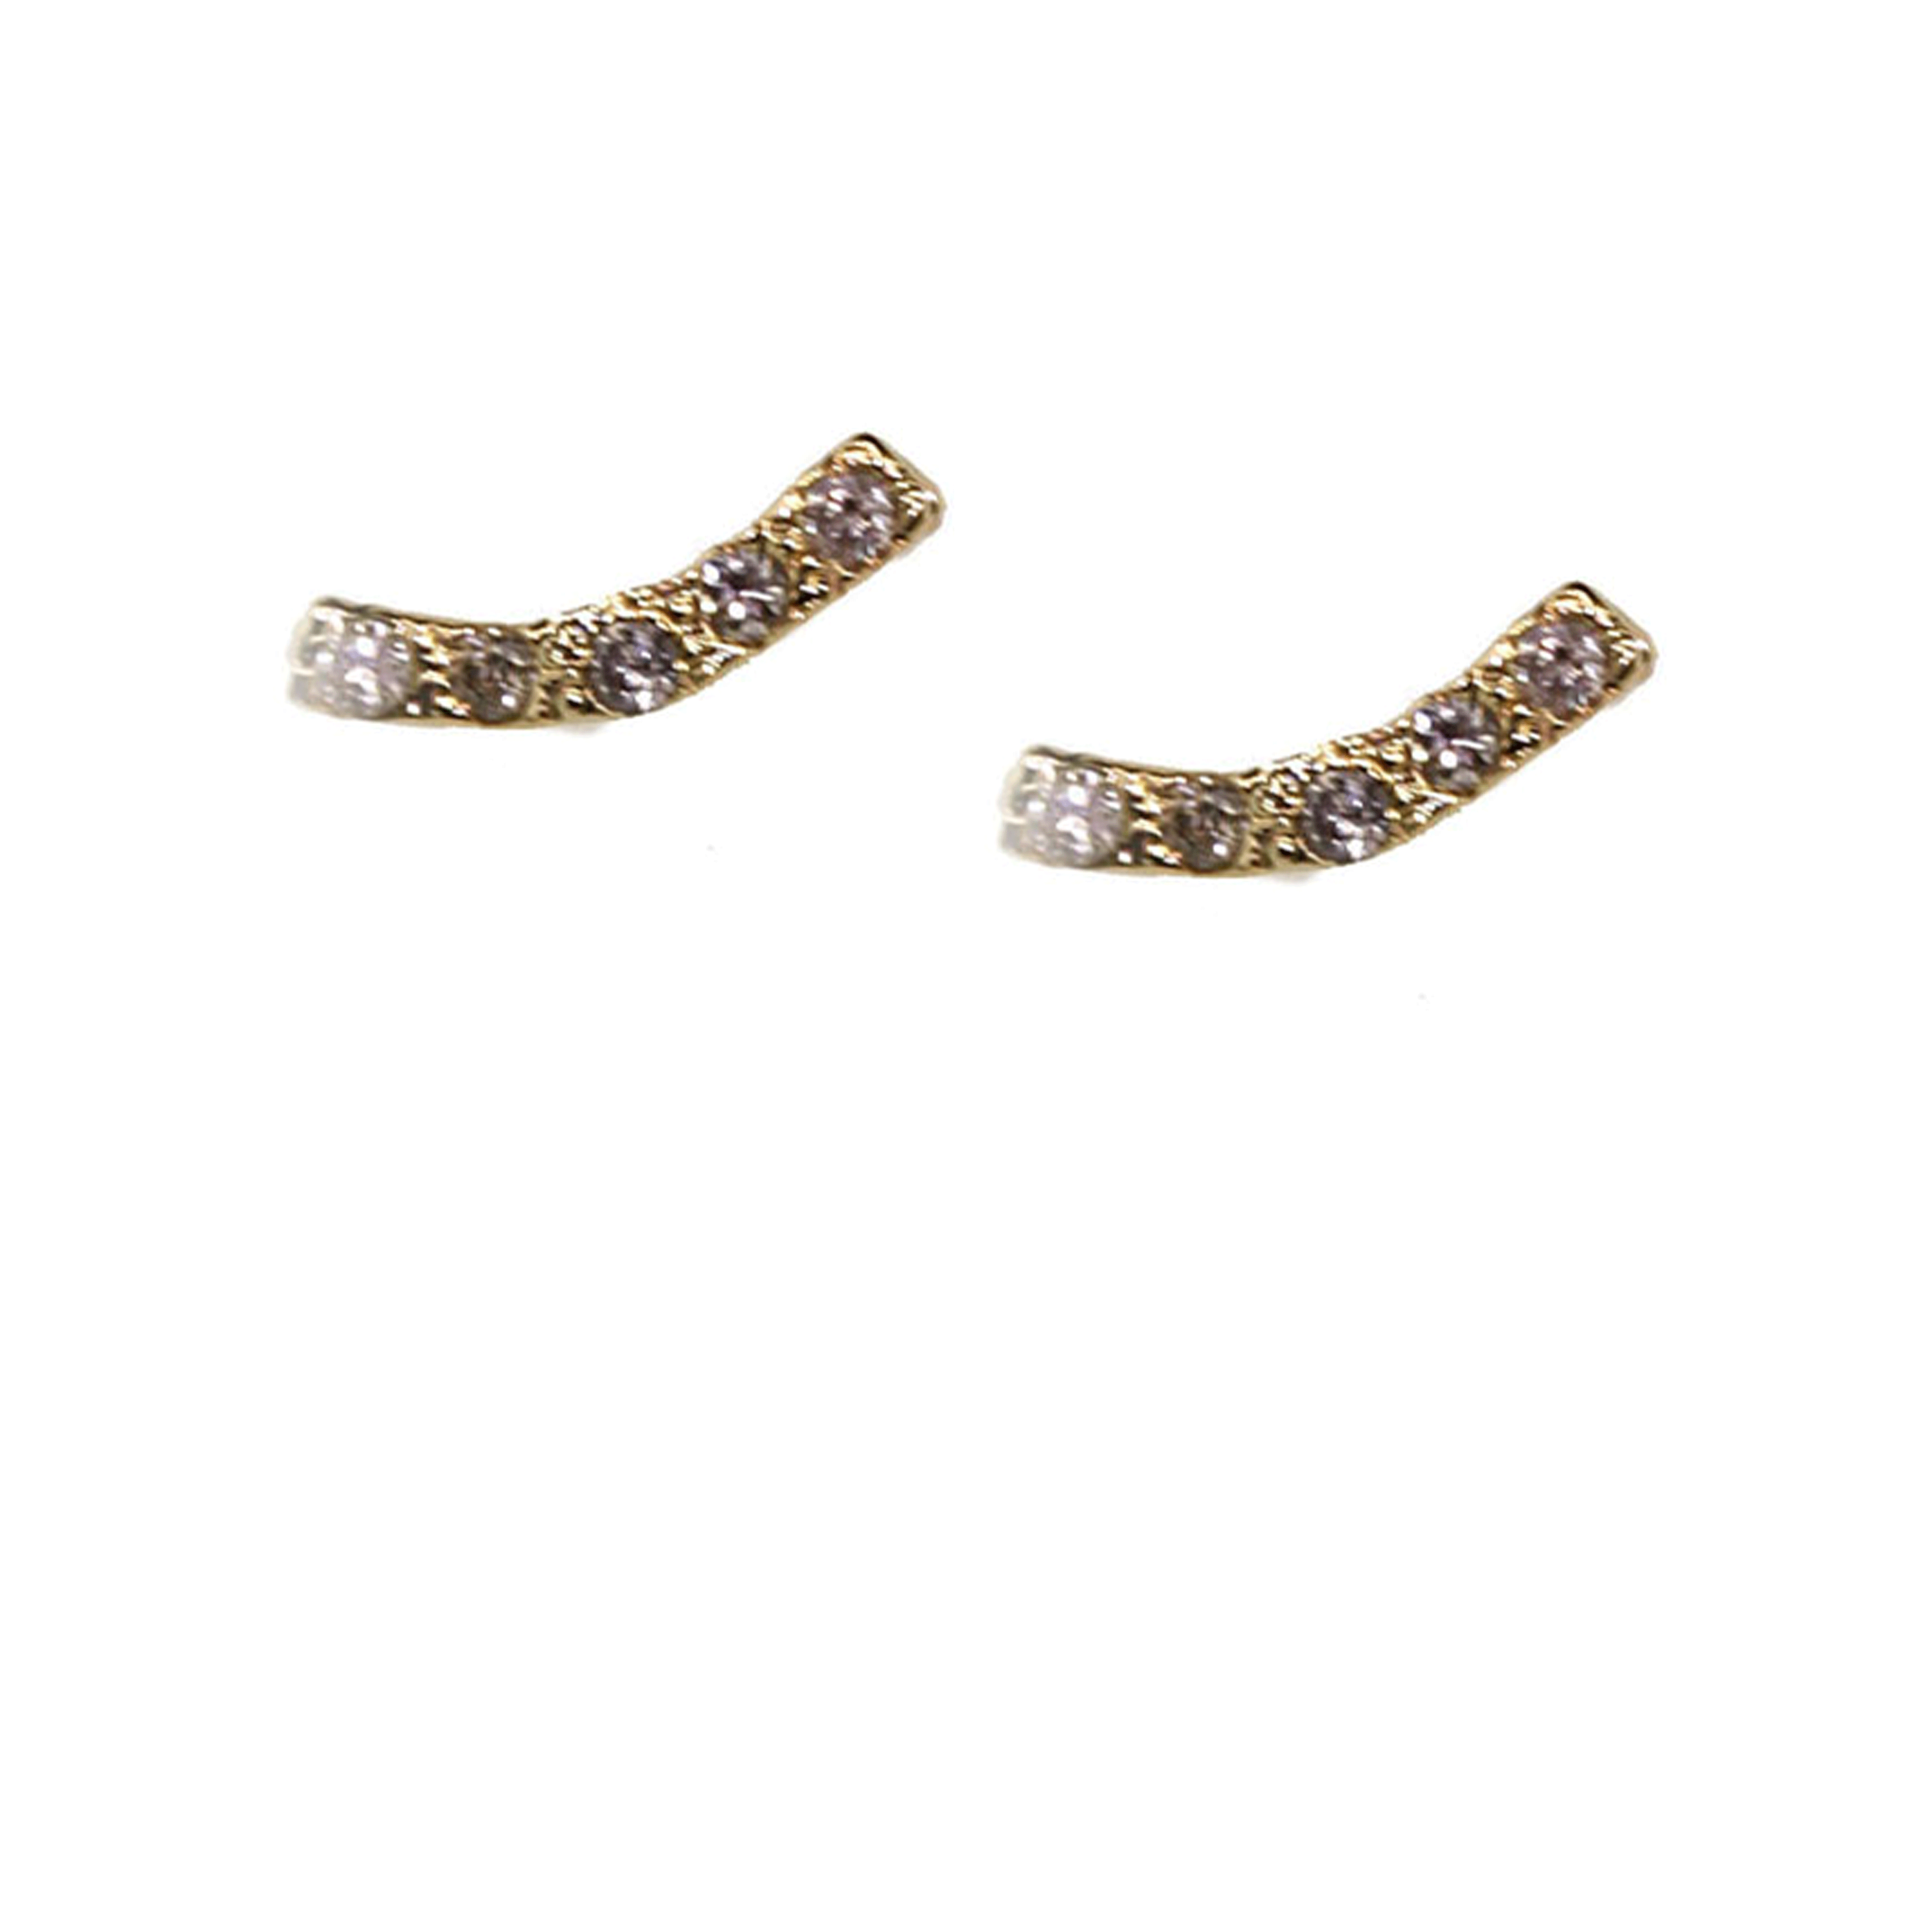 Pave Curved Bar Studs - Gold Stud Earrings - Rebecca Lankford Designs